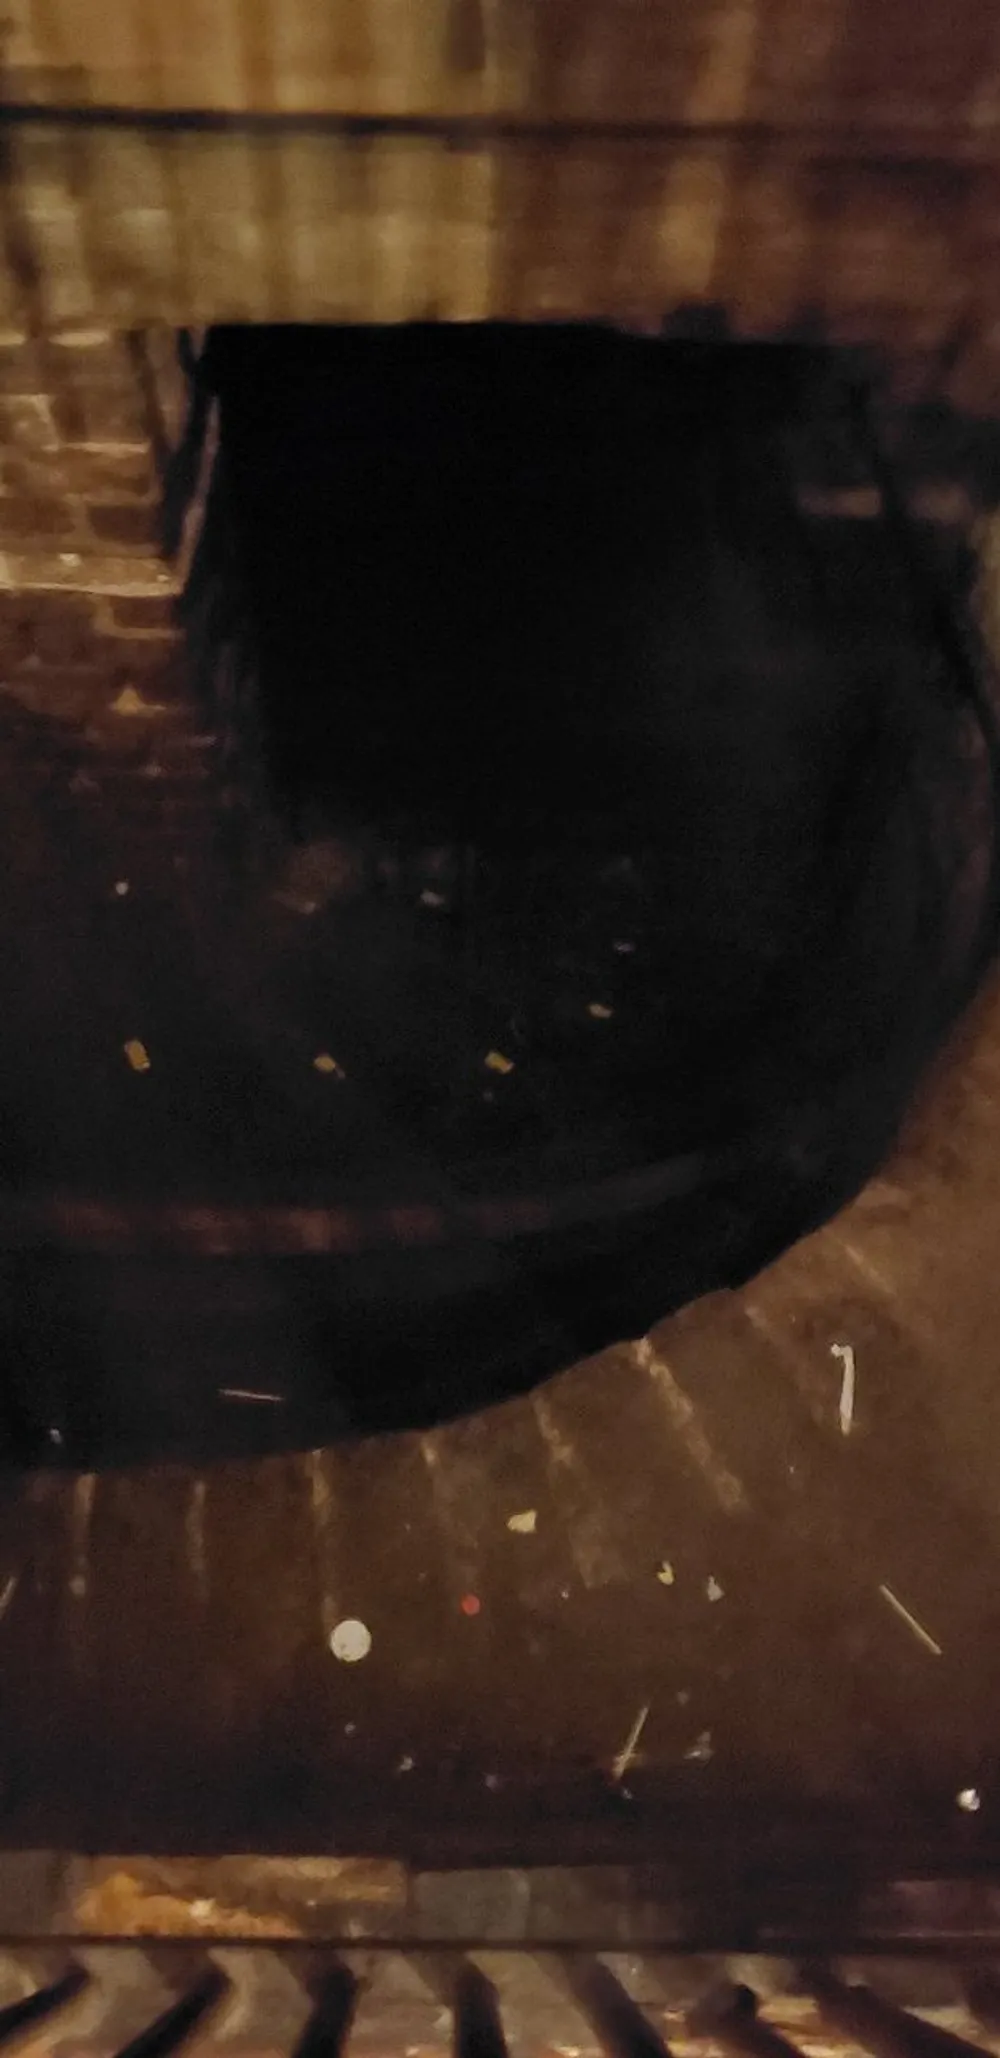 This is a dark blurry image that appears to show a poorly lit environment with indistinct features possibly an interior space with a reflective floor or wet surface